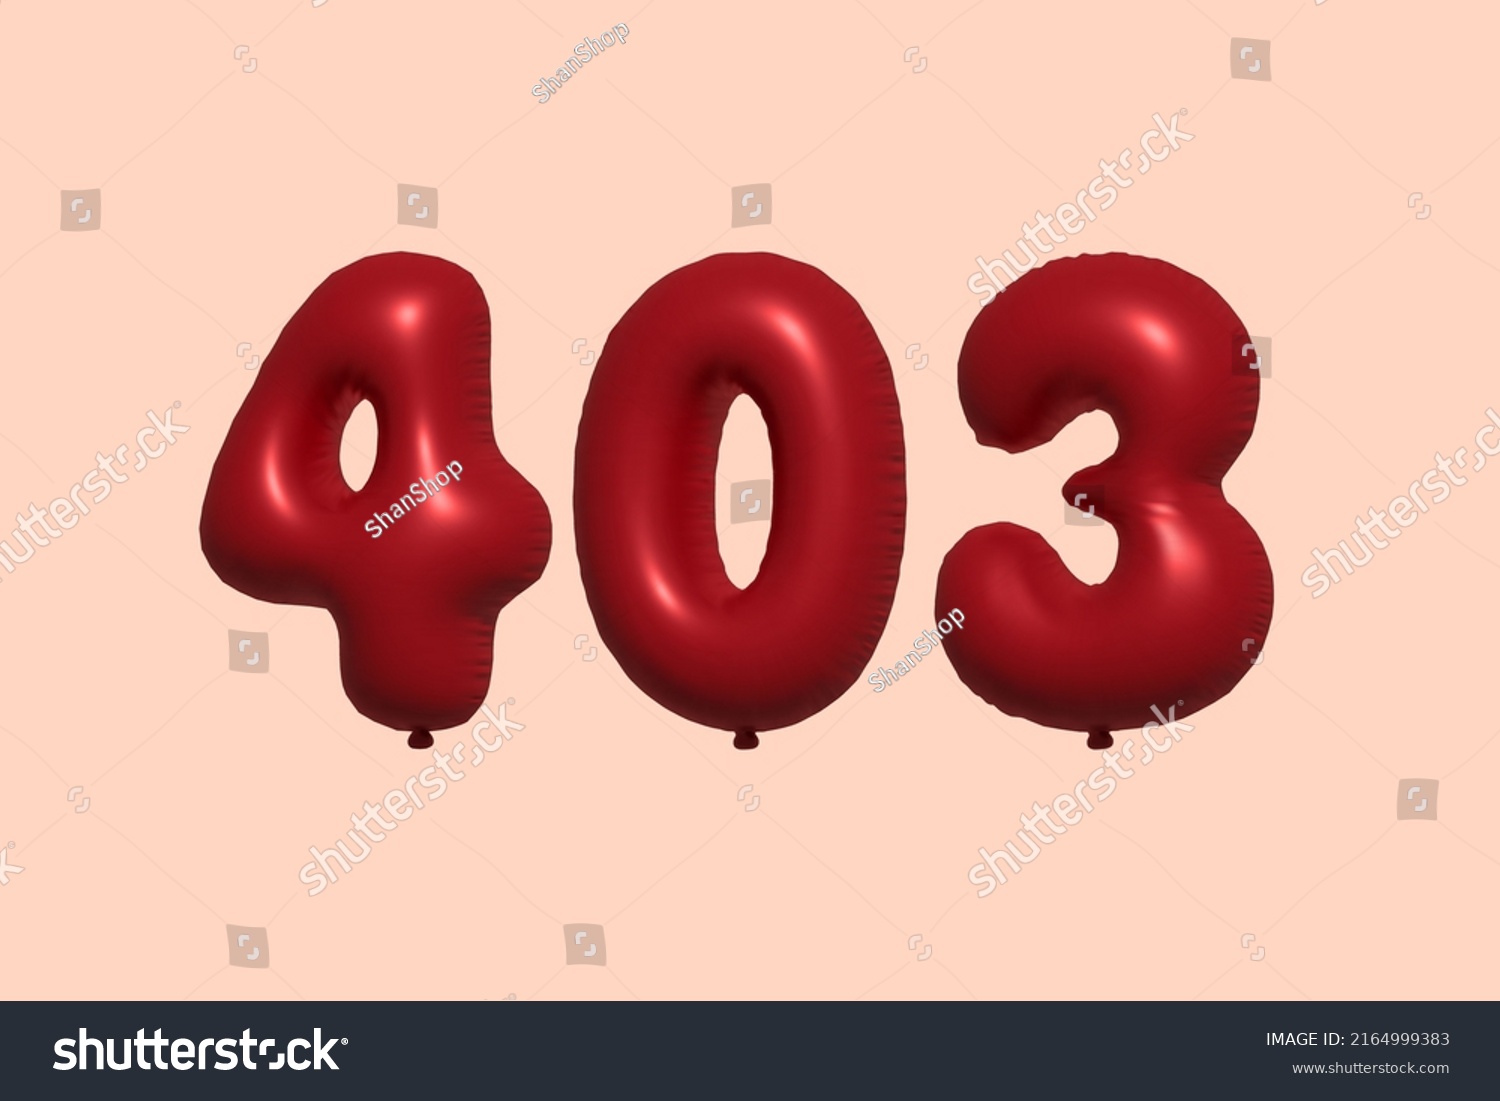 SVG of 403 3d number balloon made of realistic metallic air balloon 3d rendering. 3D Red helium balloons for sale decoration Party Birthday, Celebrate anniversary, Wedding Holiday. Vector illustration svg